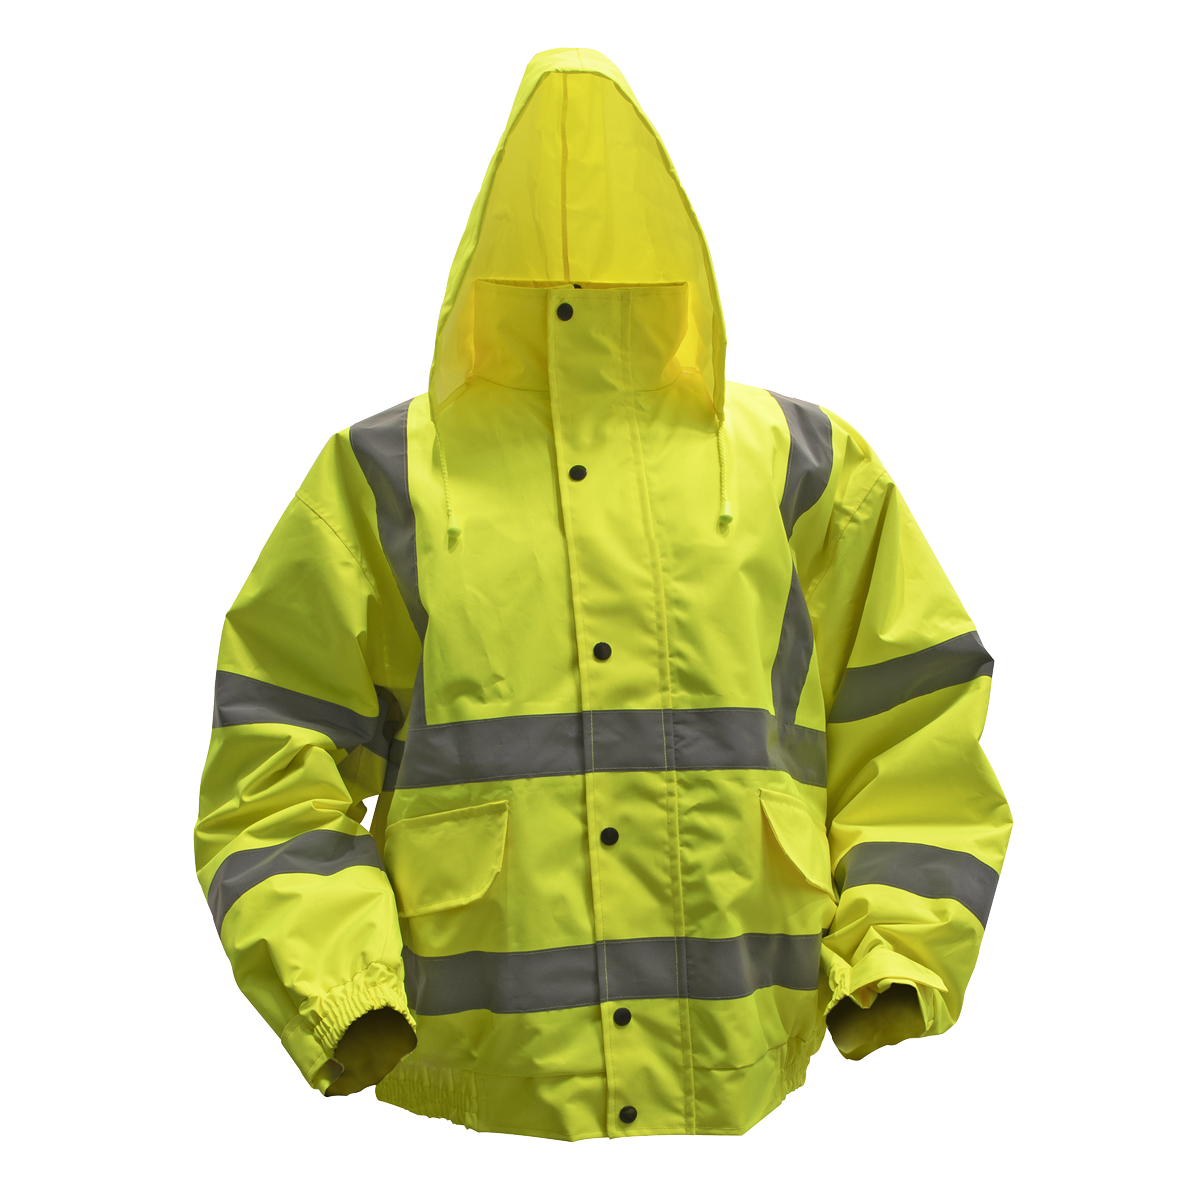 Sealey Hi-Vis Yellow Jacket with Quilted Lining & Elasticated Waist - XX-Large 802XXL